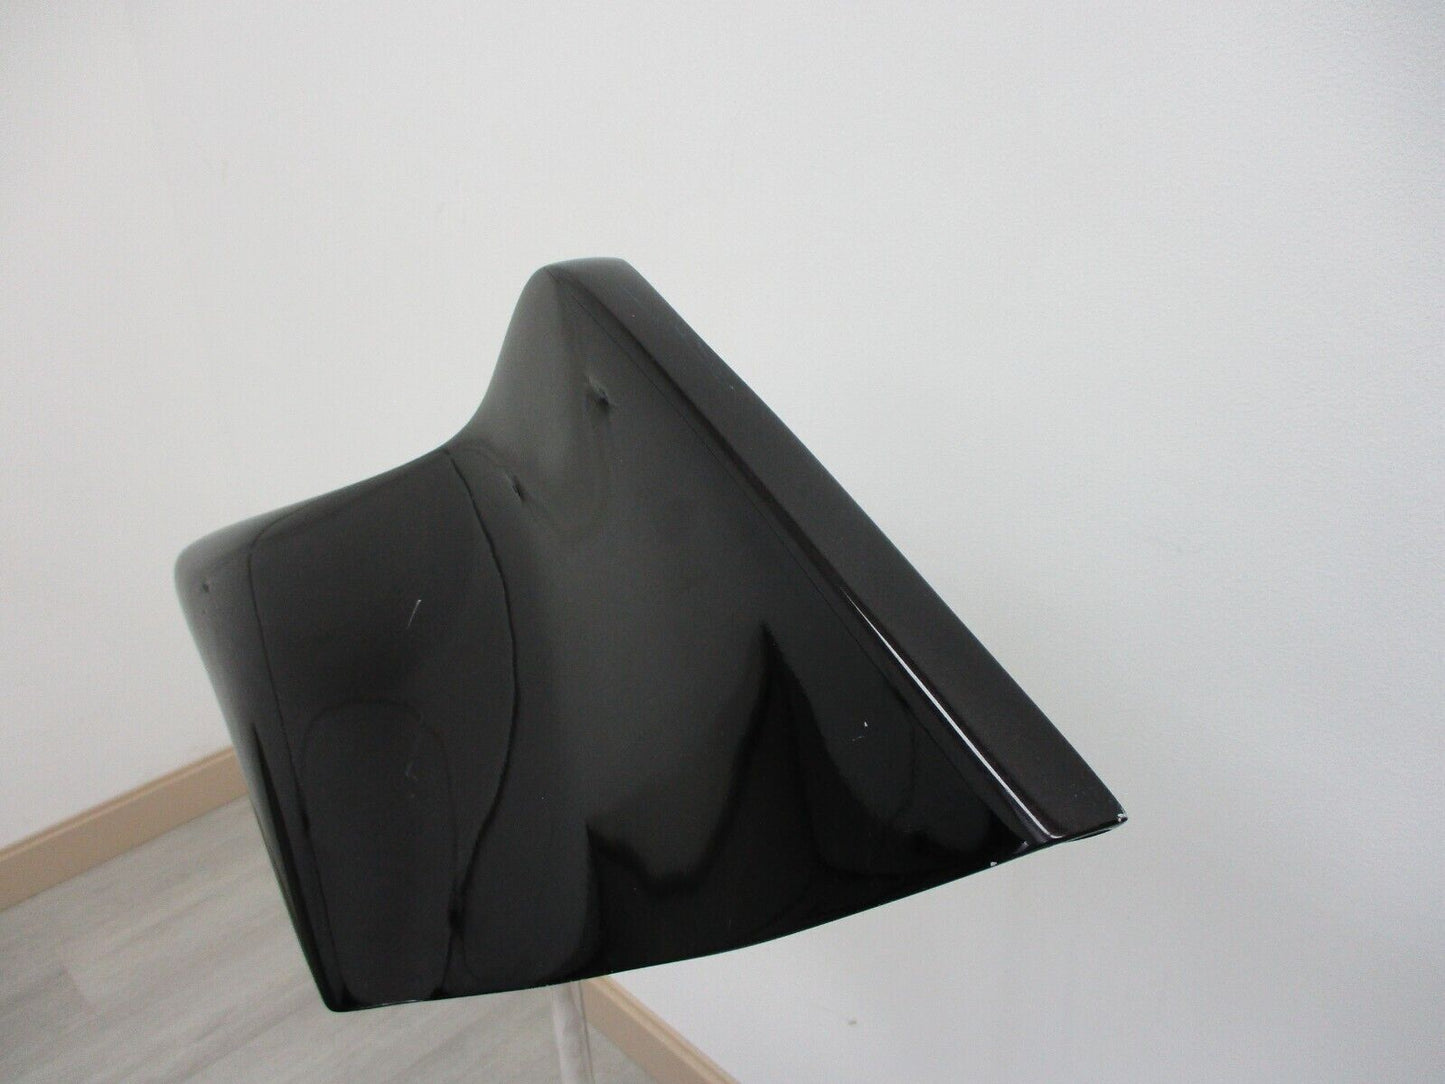 09 + Later Left Stretched Sidecover for Stretched Saddlebags RL36